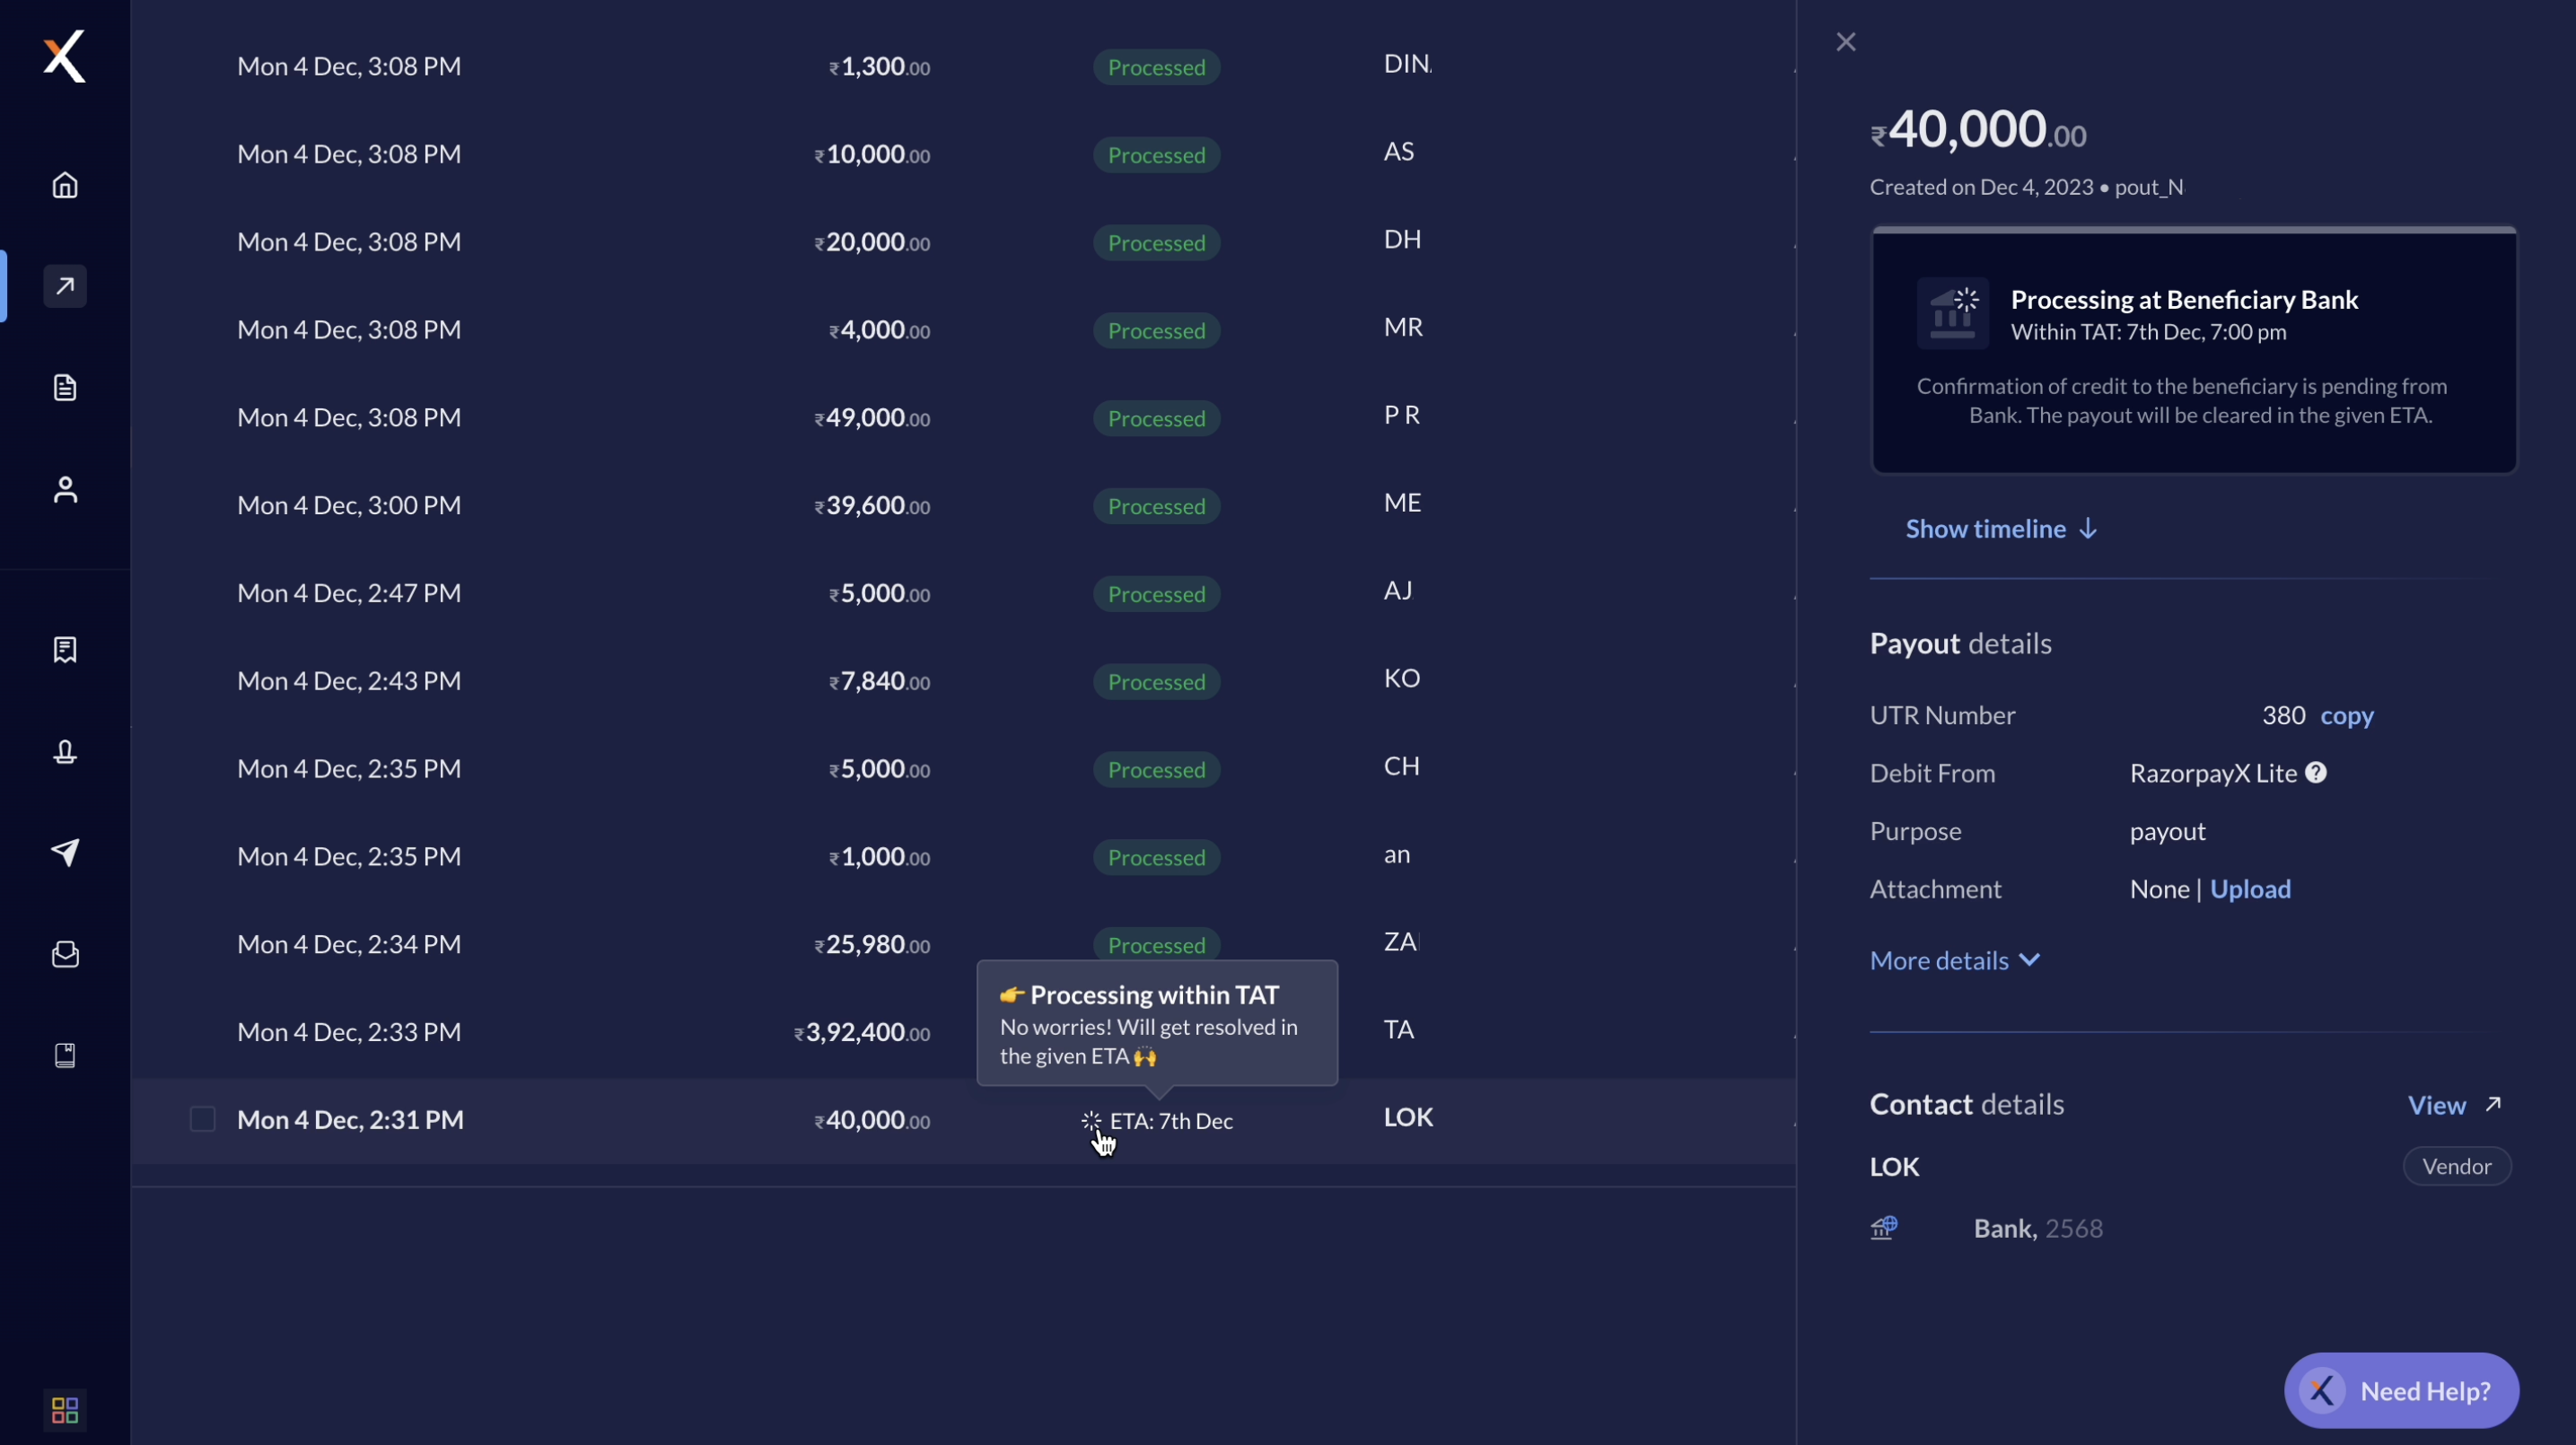 Payout status details on dashboard